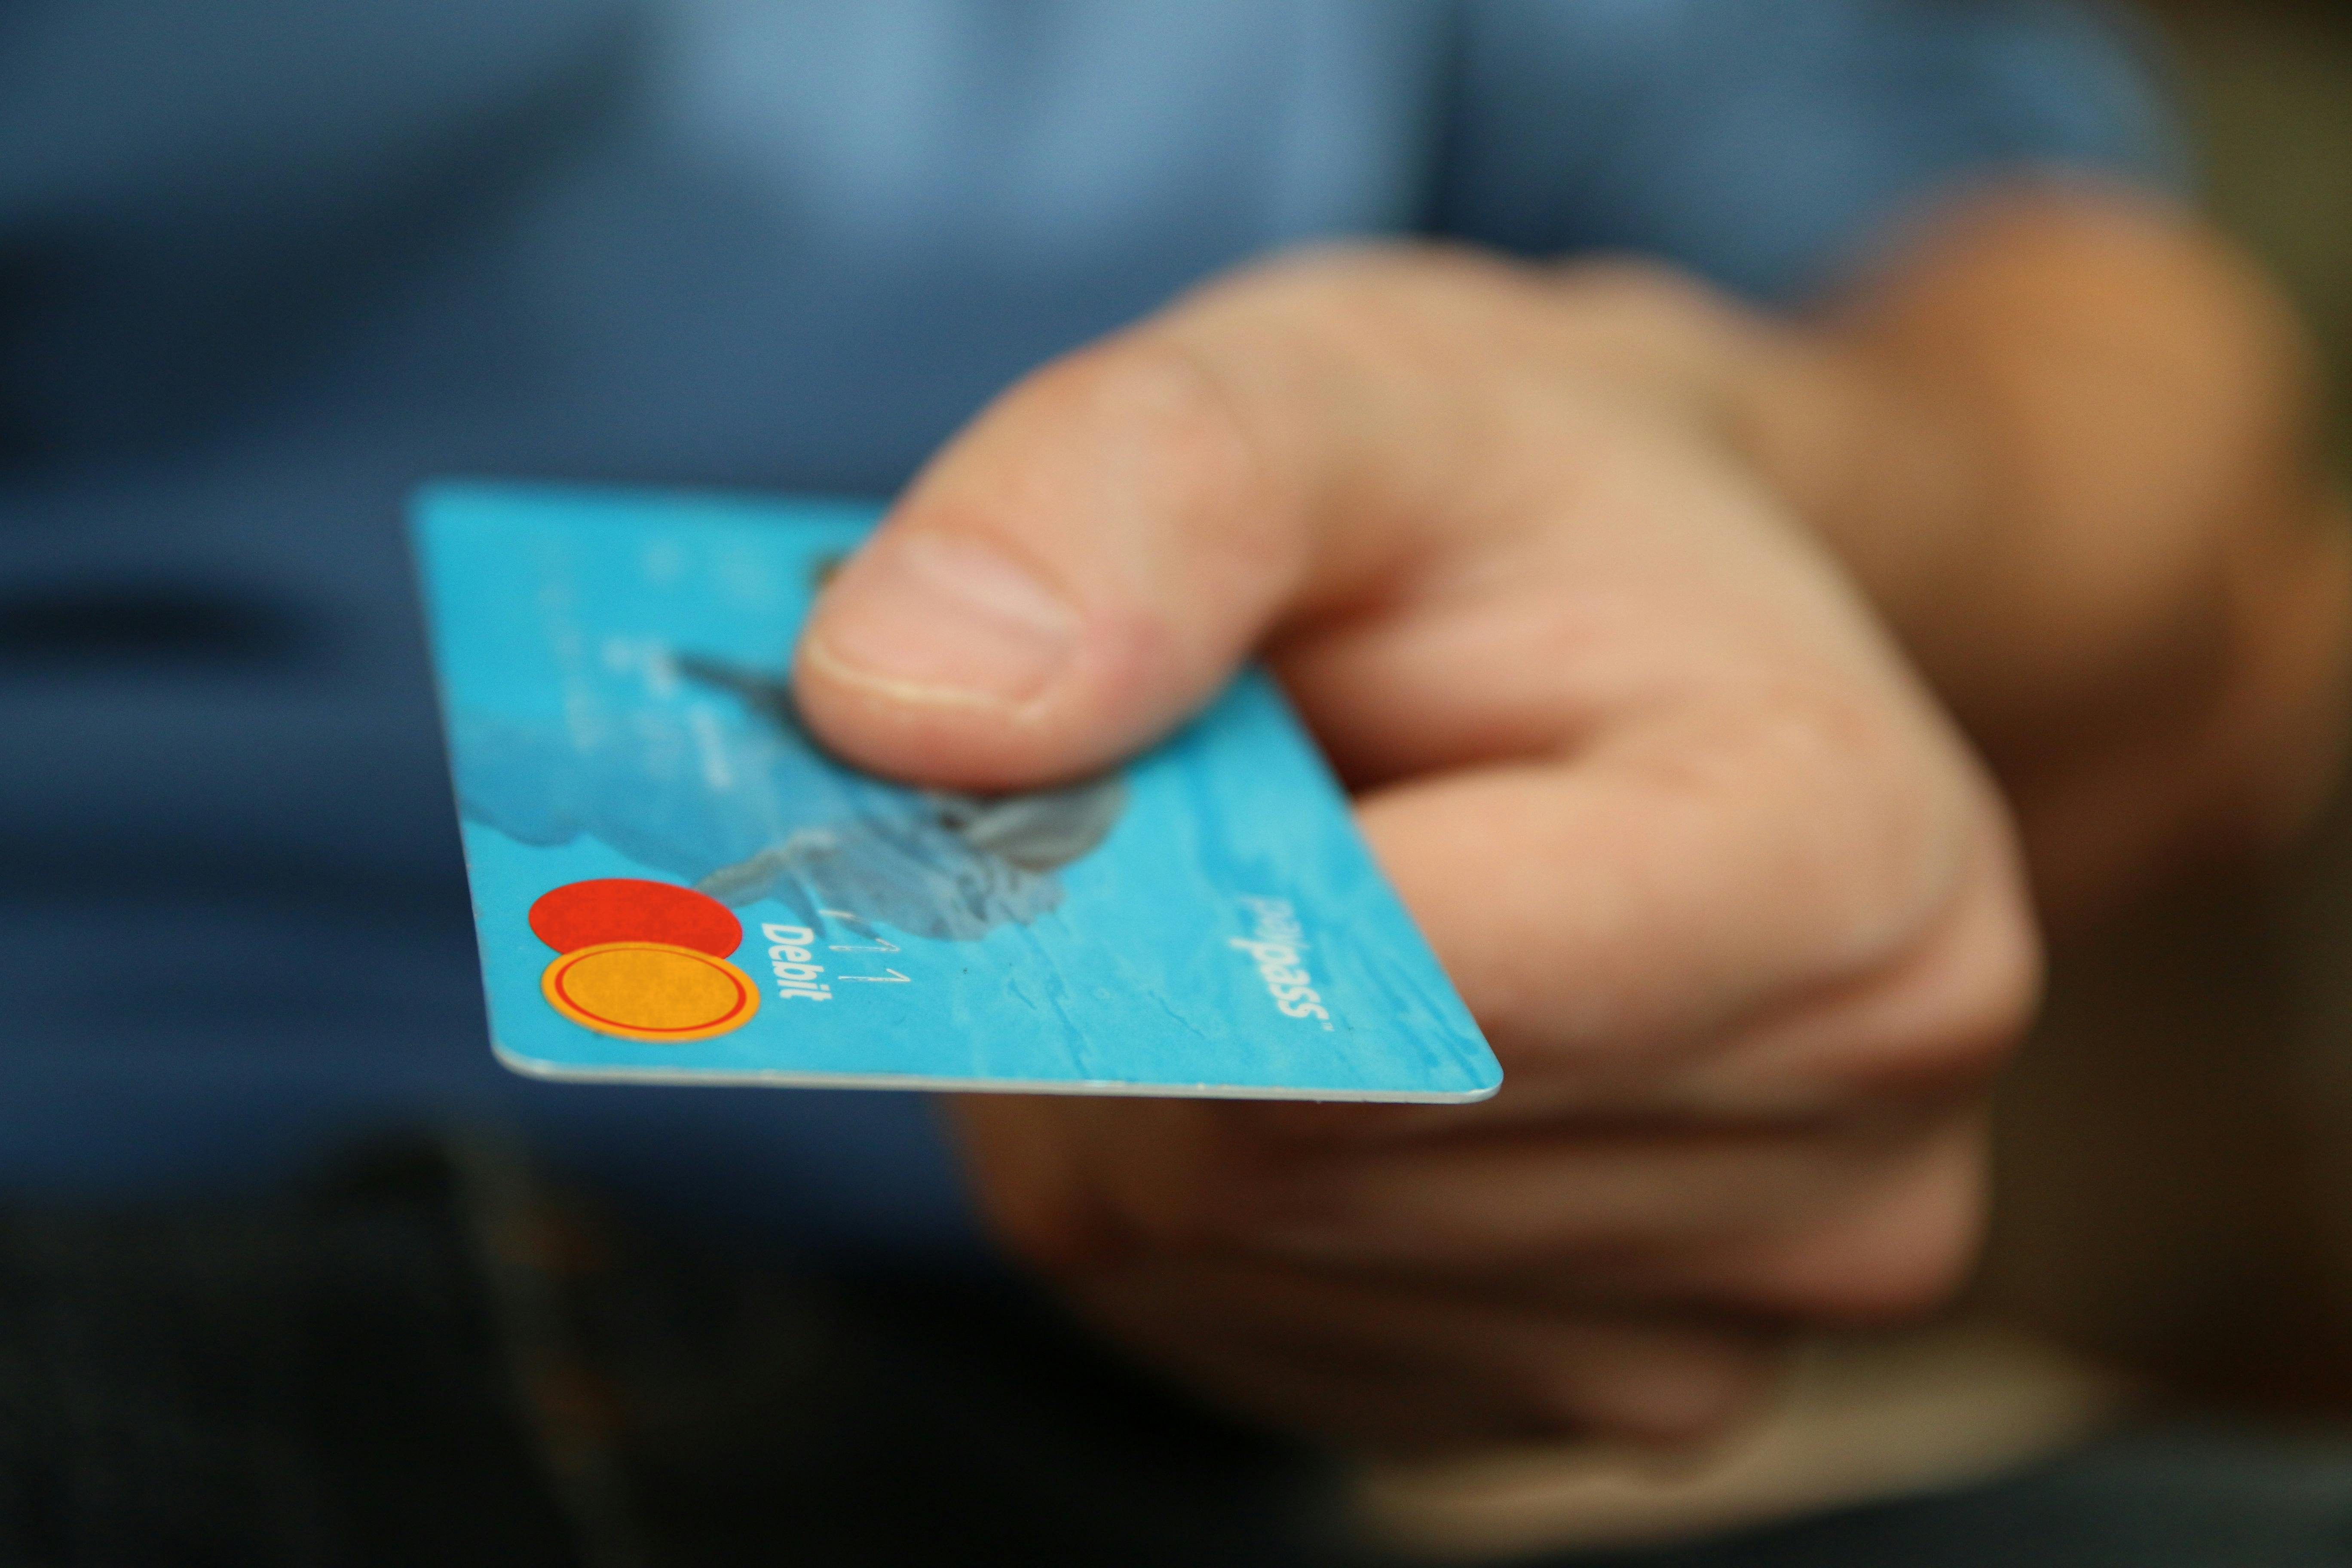 Person holding a credit card.